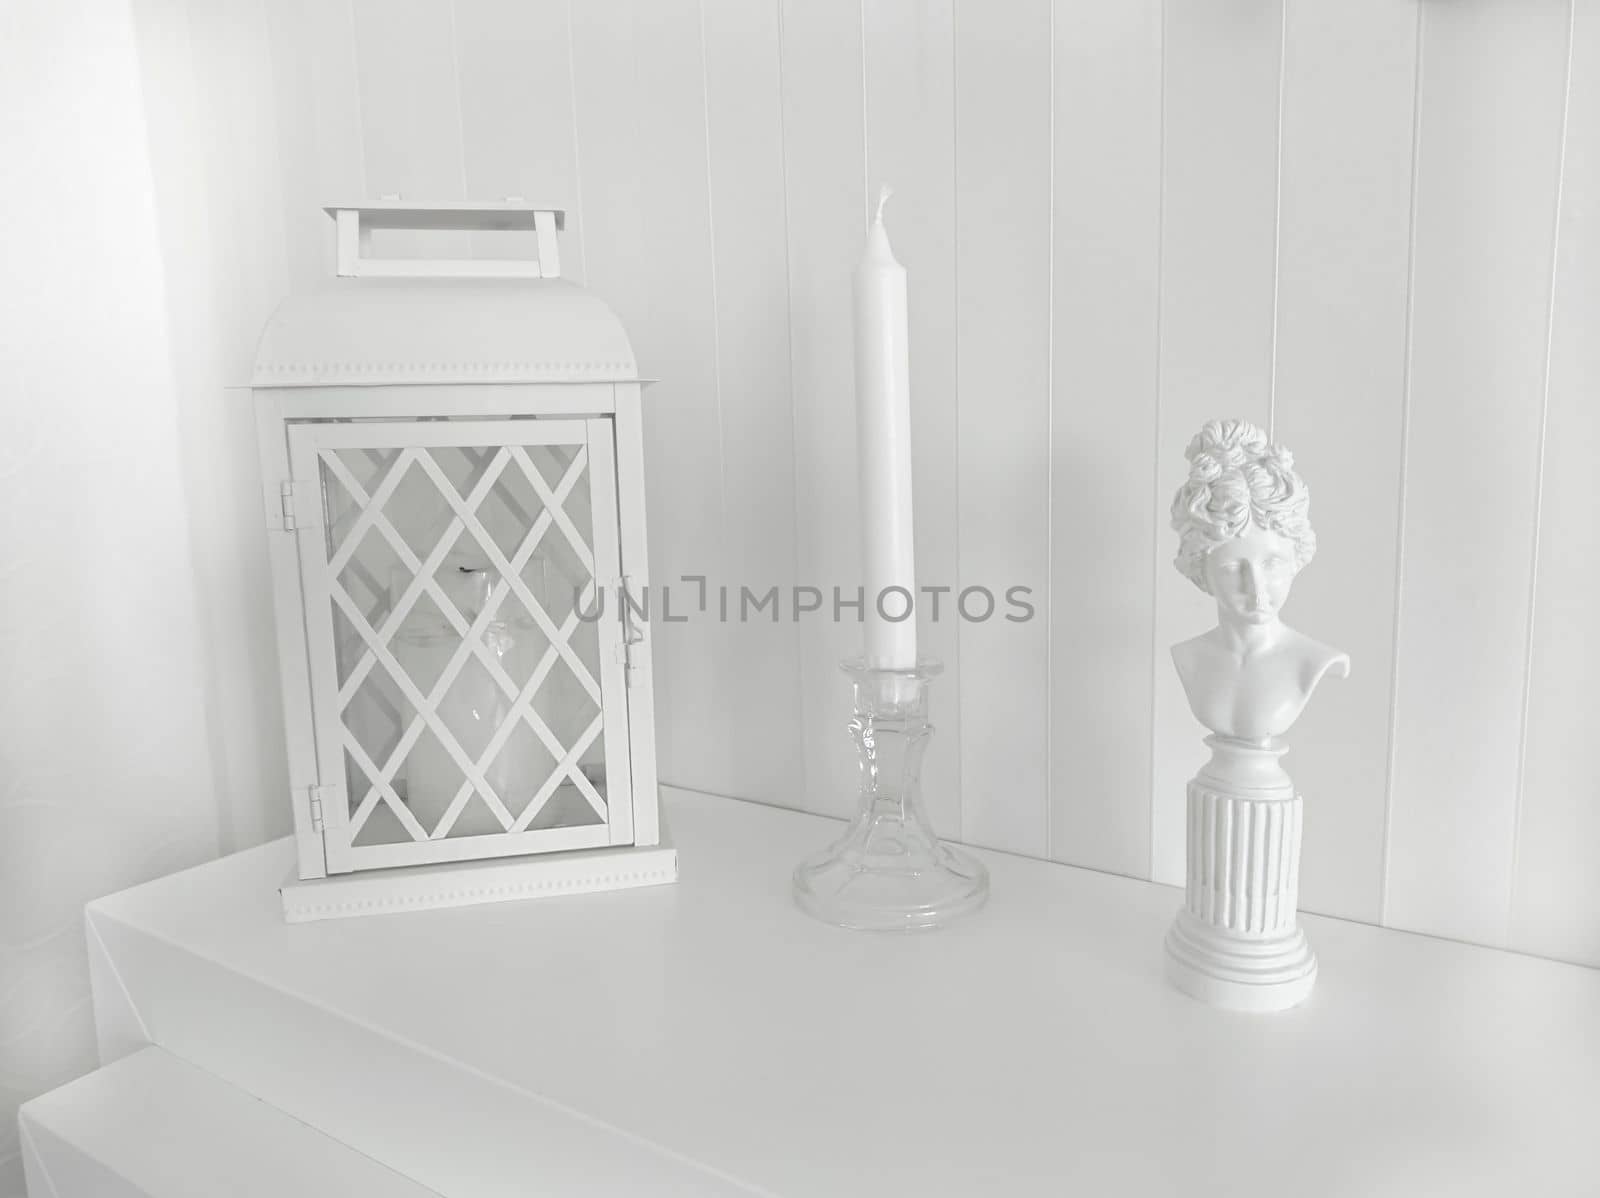 Texture or background.Composition on the fireplace with a lantern a candlestick and a statuette of a woman of bygone eras